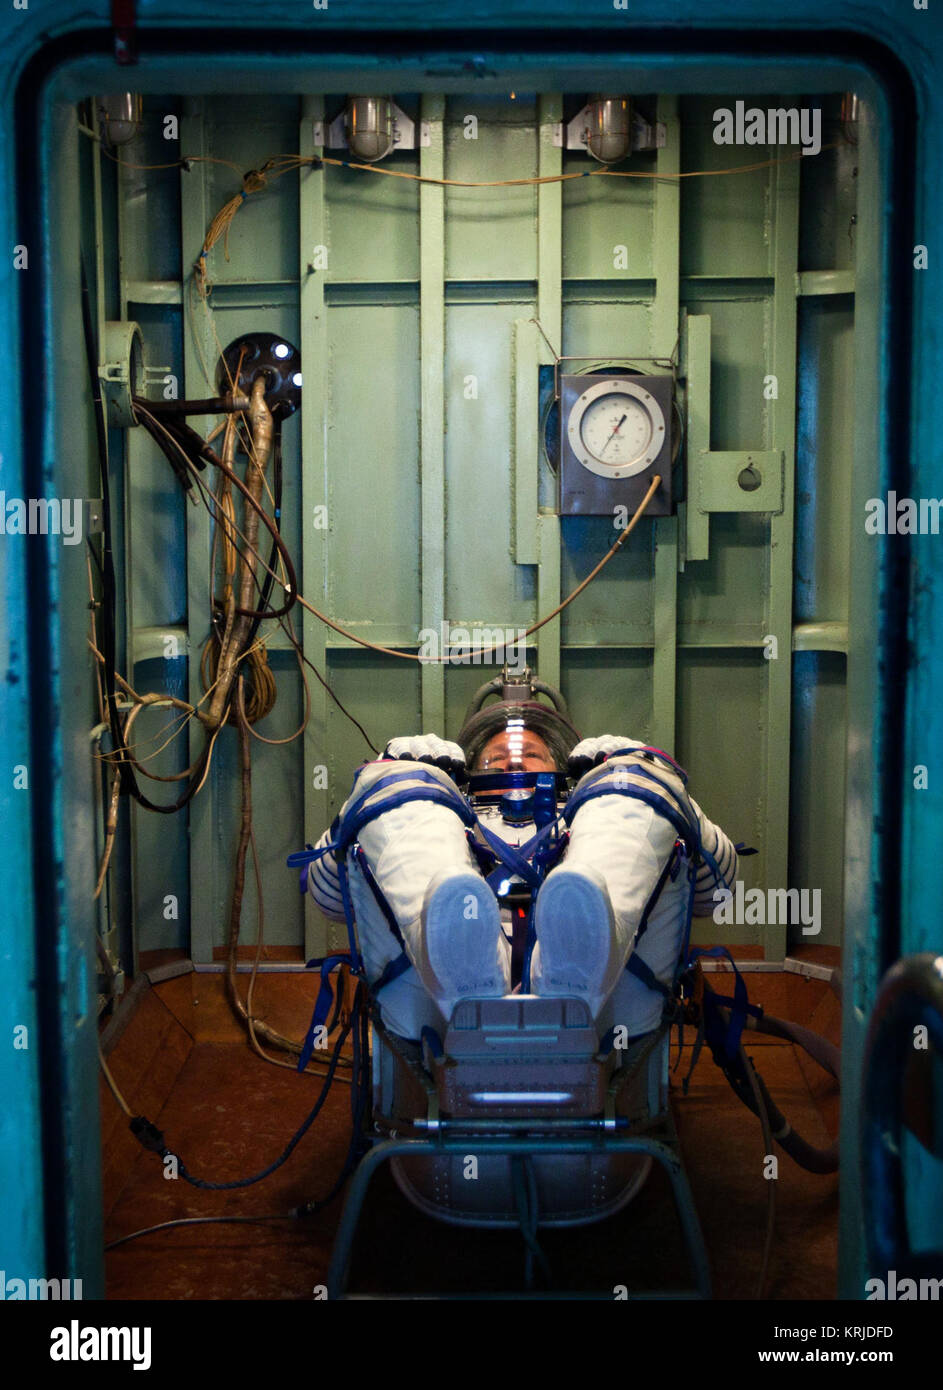 NASA astronaut Doug Hurley waits in a pressure chamber before a test of his Sokol space suit at the Zvezda facility on Wednesday, March 30, 2011, in Moscow. The crew of the final shuttle mission traveled to Moscow for a suit fit check of their Russian Soyuz suits that will be required in the event of an emergency.   ( NASA Photo / Houston Chronicle, Smiley N. Pool ) STS-135 Doug Hurley with his Sokol spacesuit in a pressure chamber Stock Photo